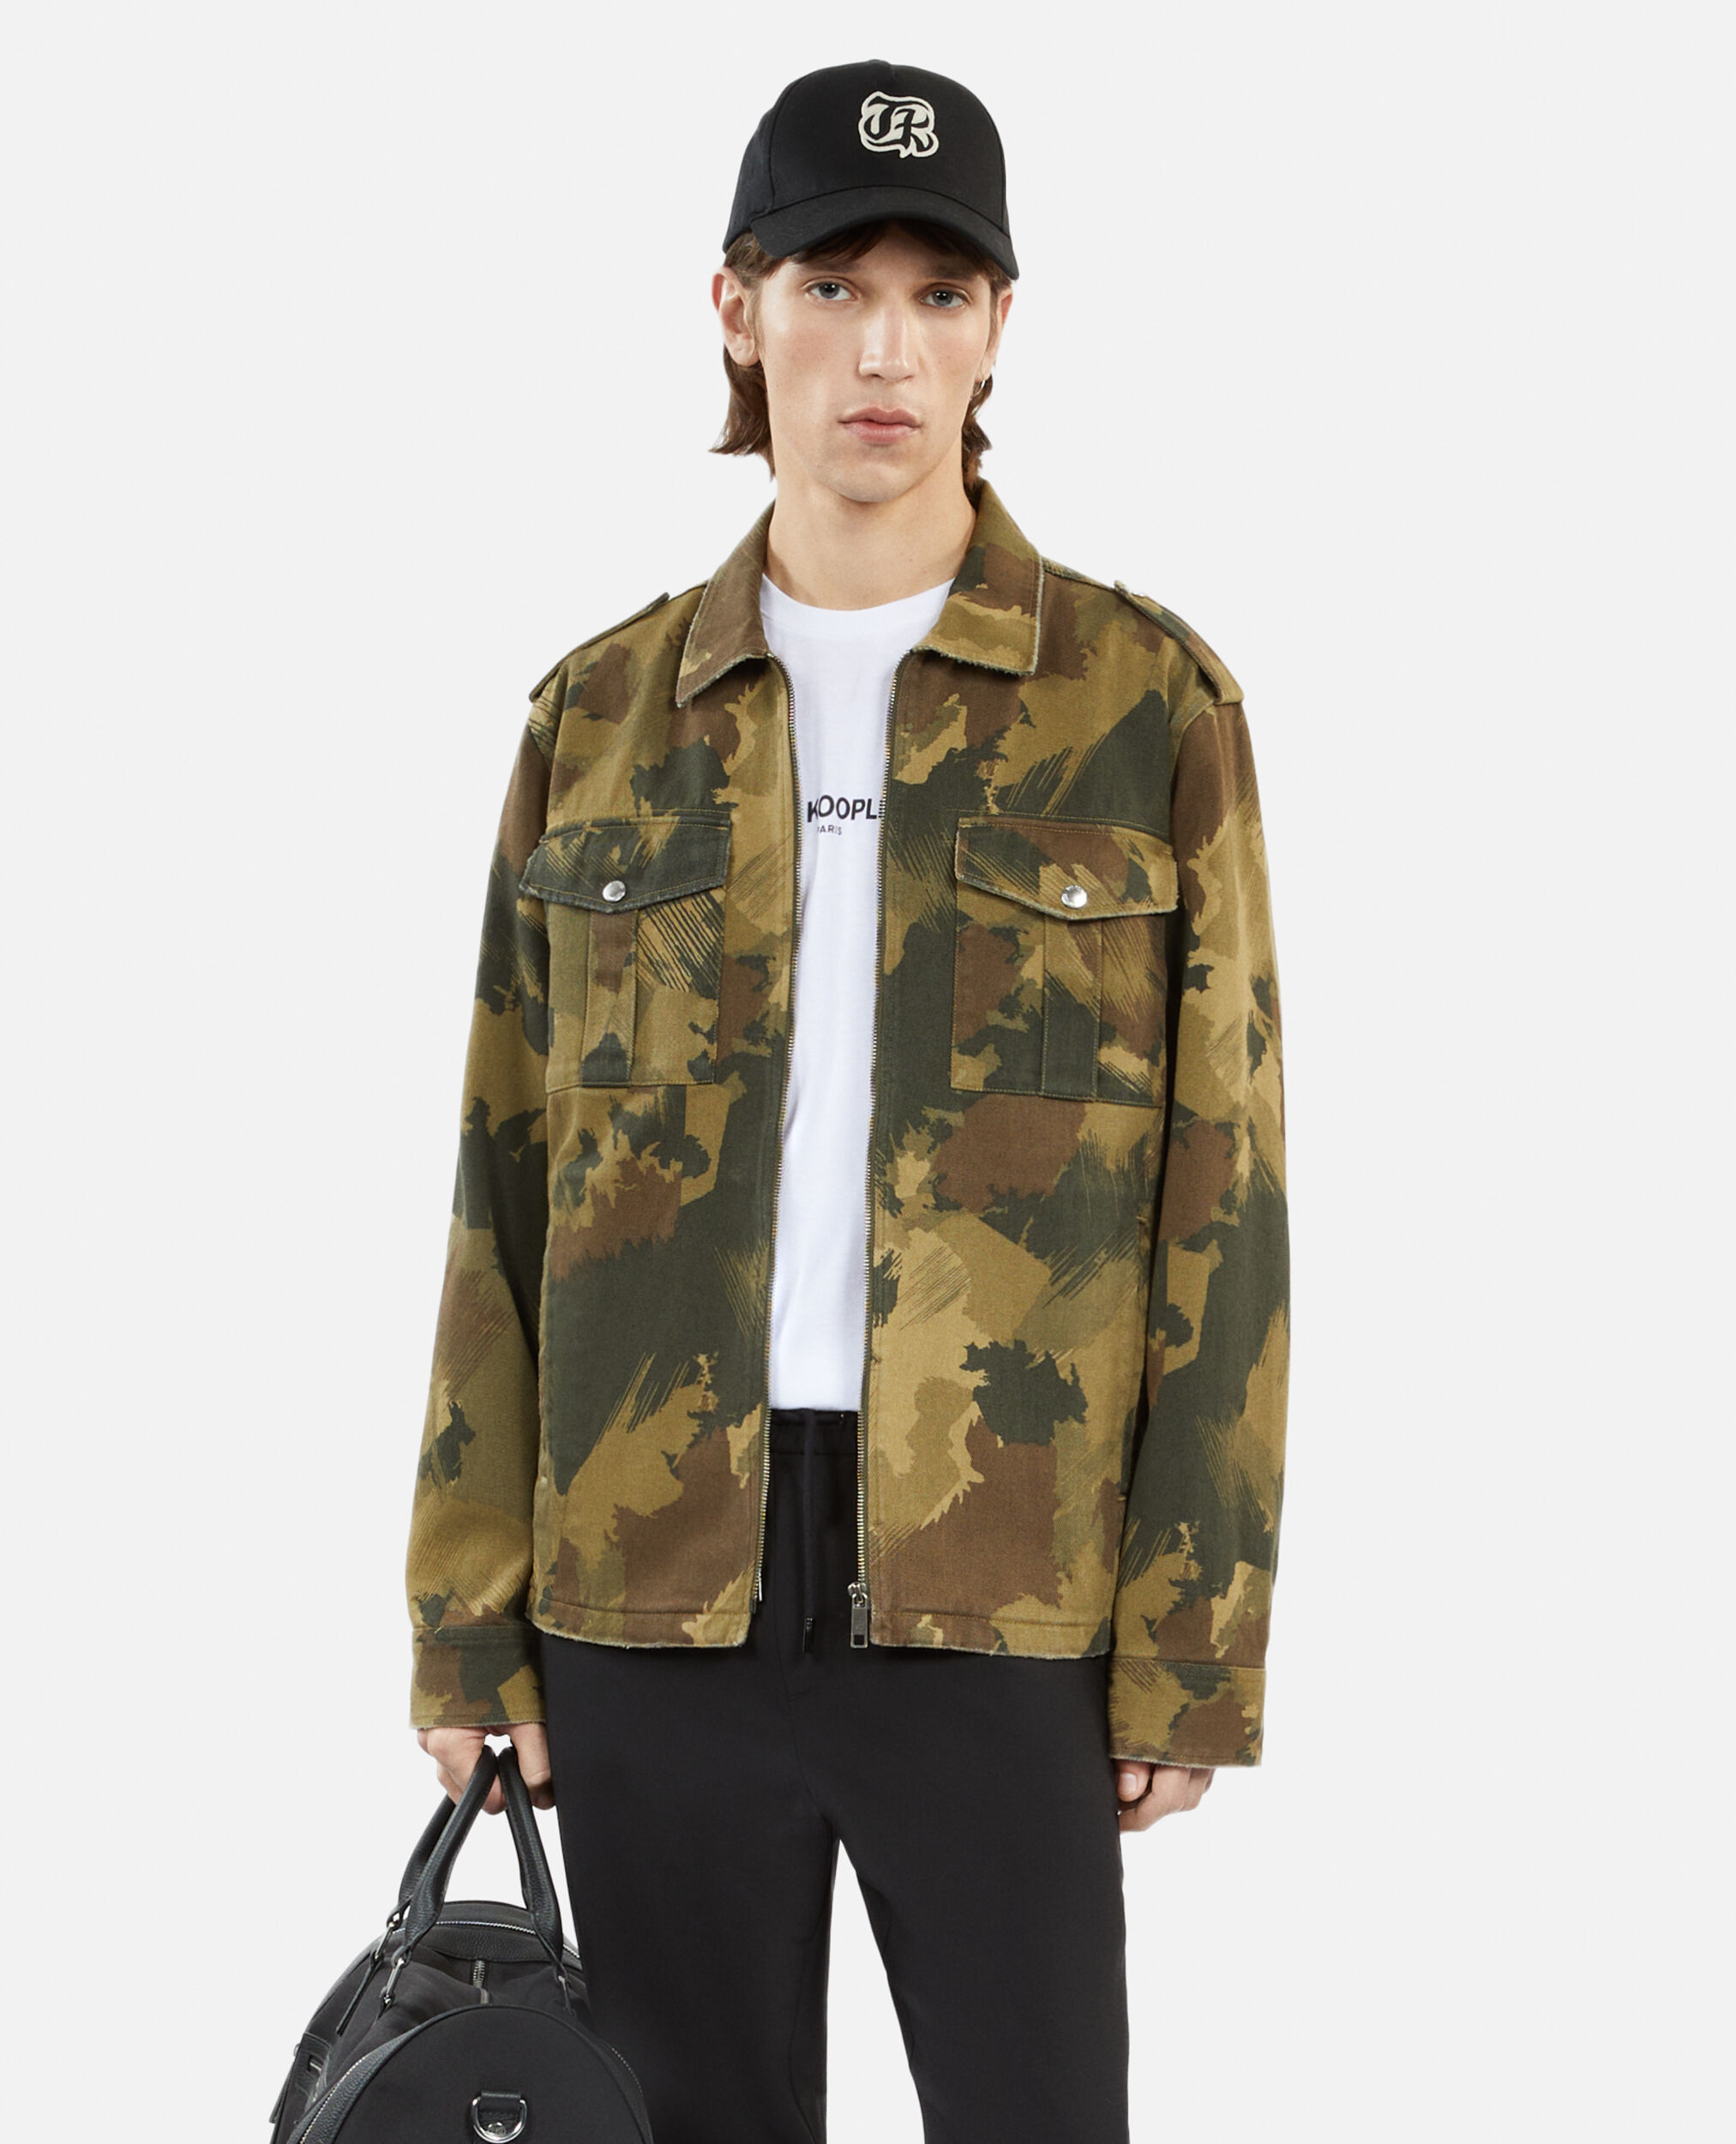 Blouson in Camouflage, CAMOUFLAGE, hi-res image number null